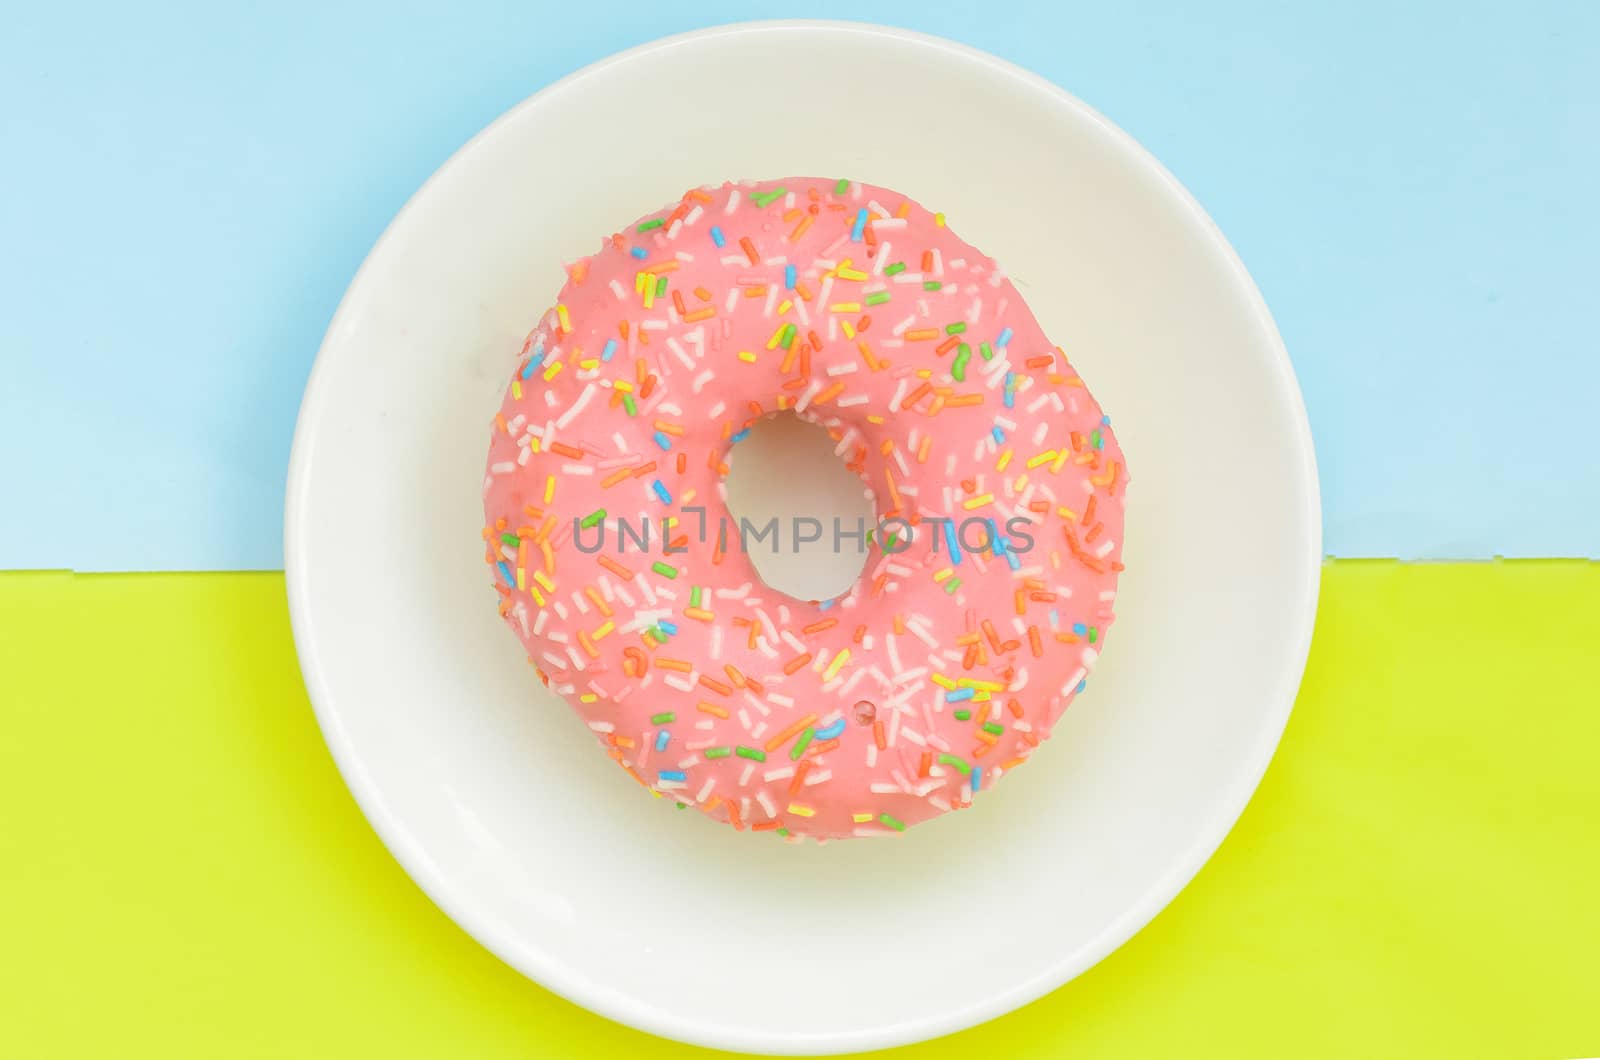 Top view, pink glazed donut on white plate on pastel green turquoise background.Sweet dessert for snack.